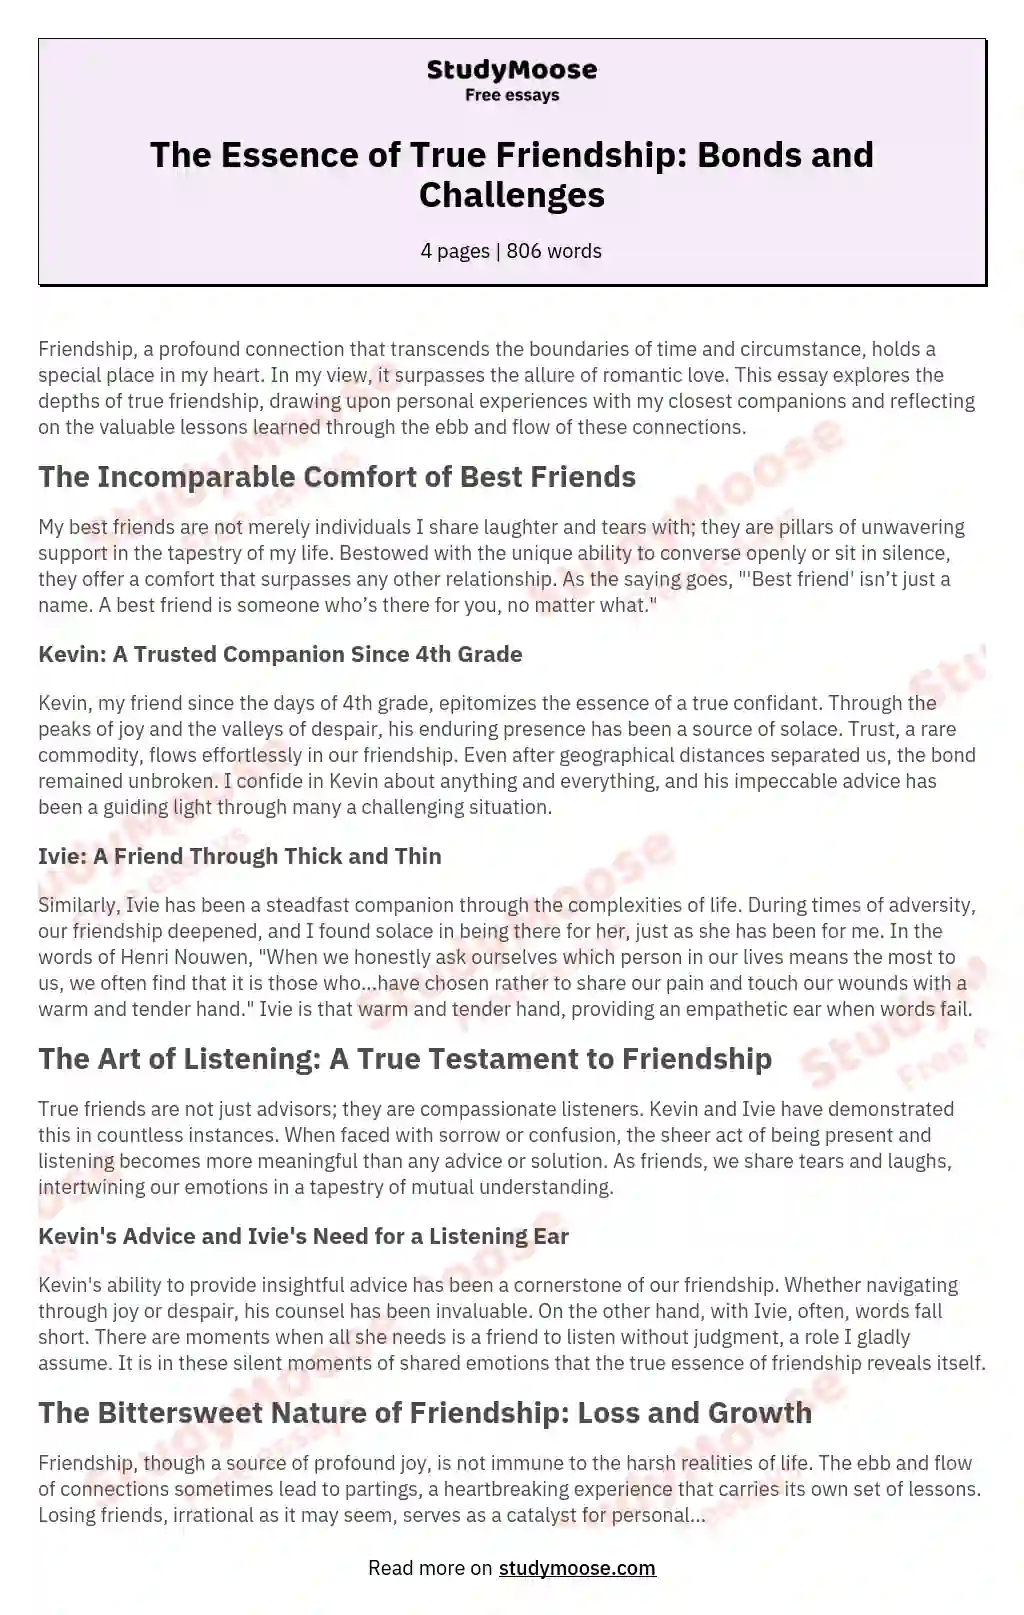 The Essence of True Friendship: Bonds and Challenges essay